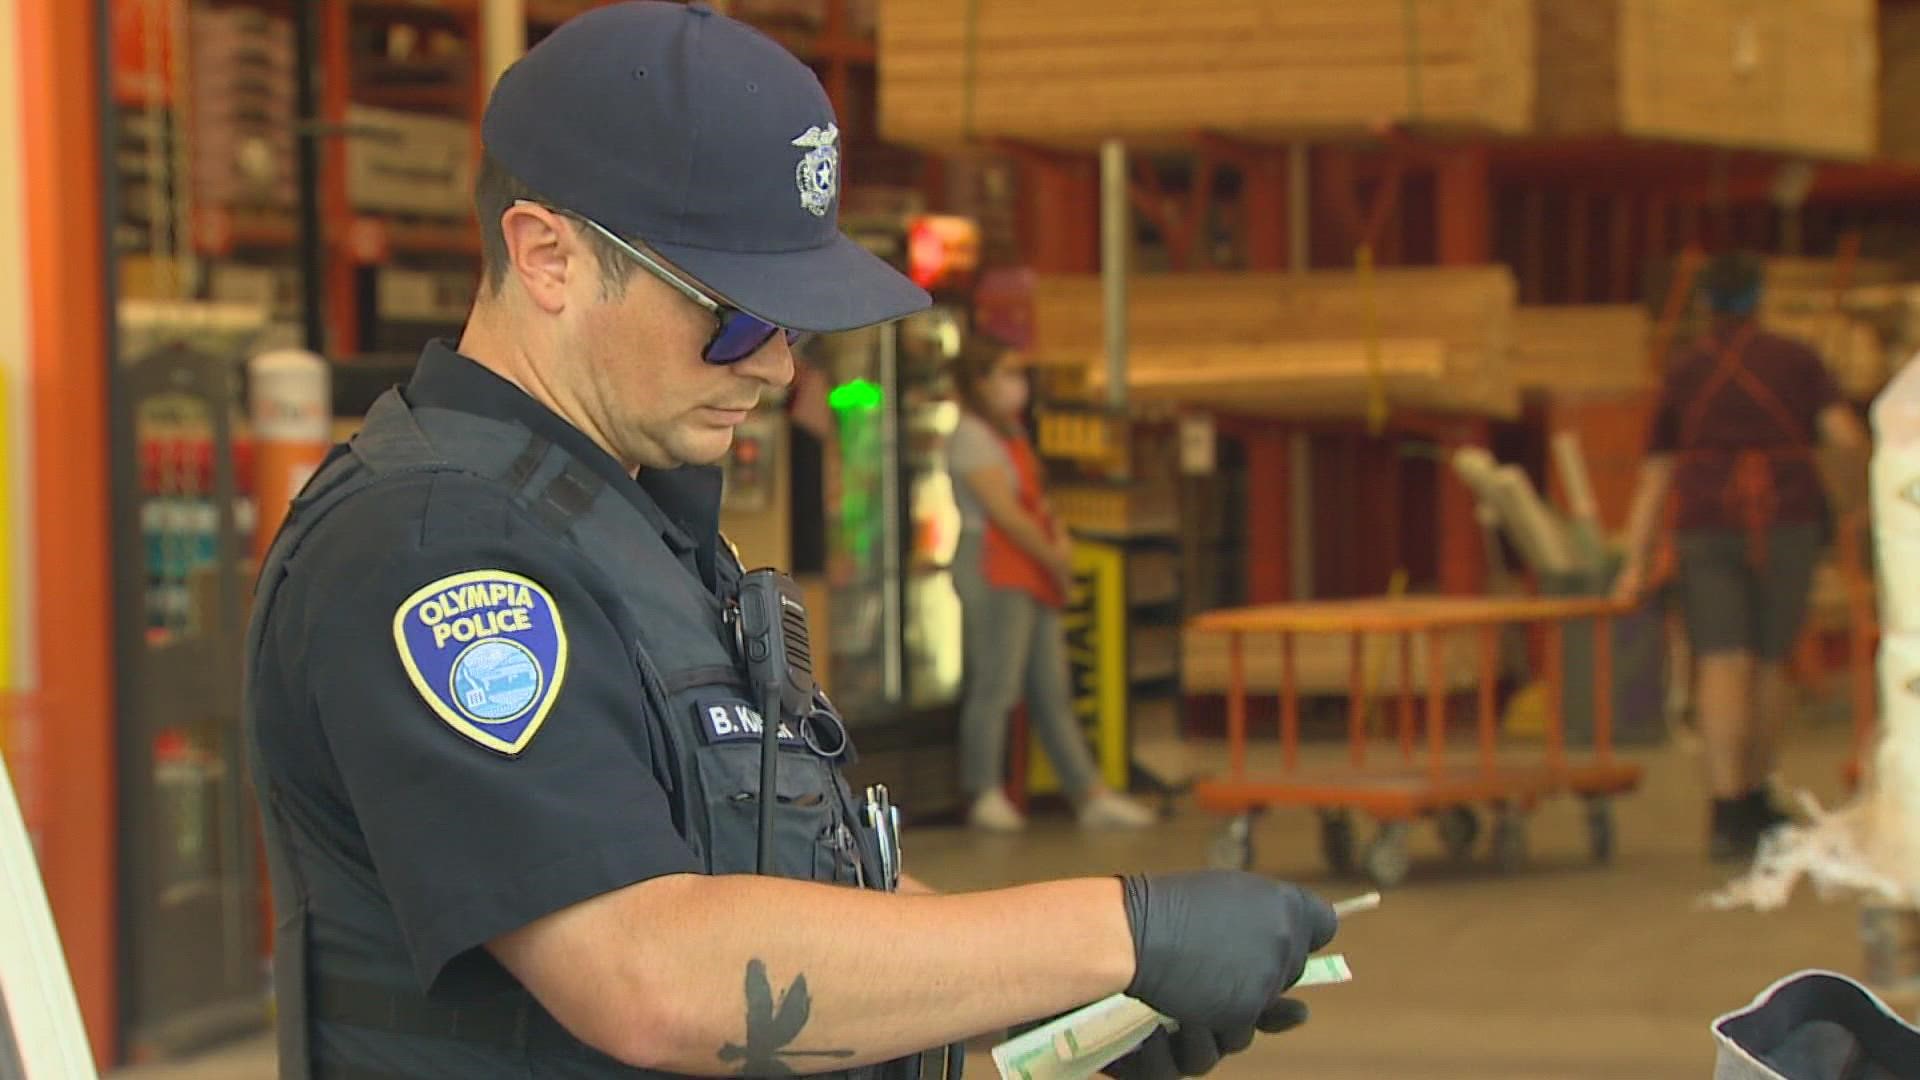 An Olympia police officer said he was surprised how many people were either cited or arrested.